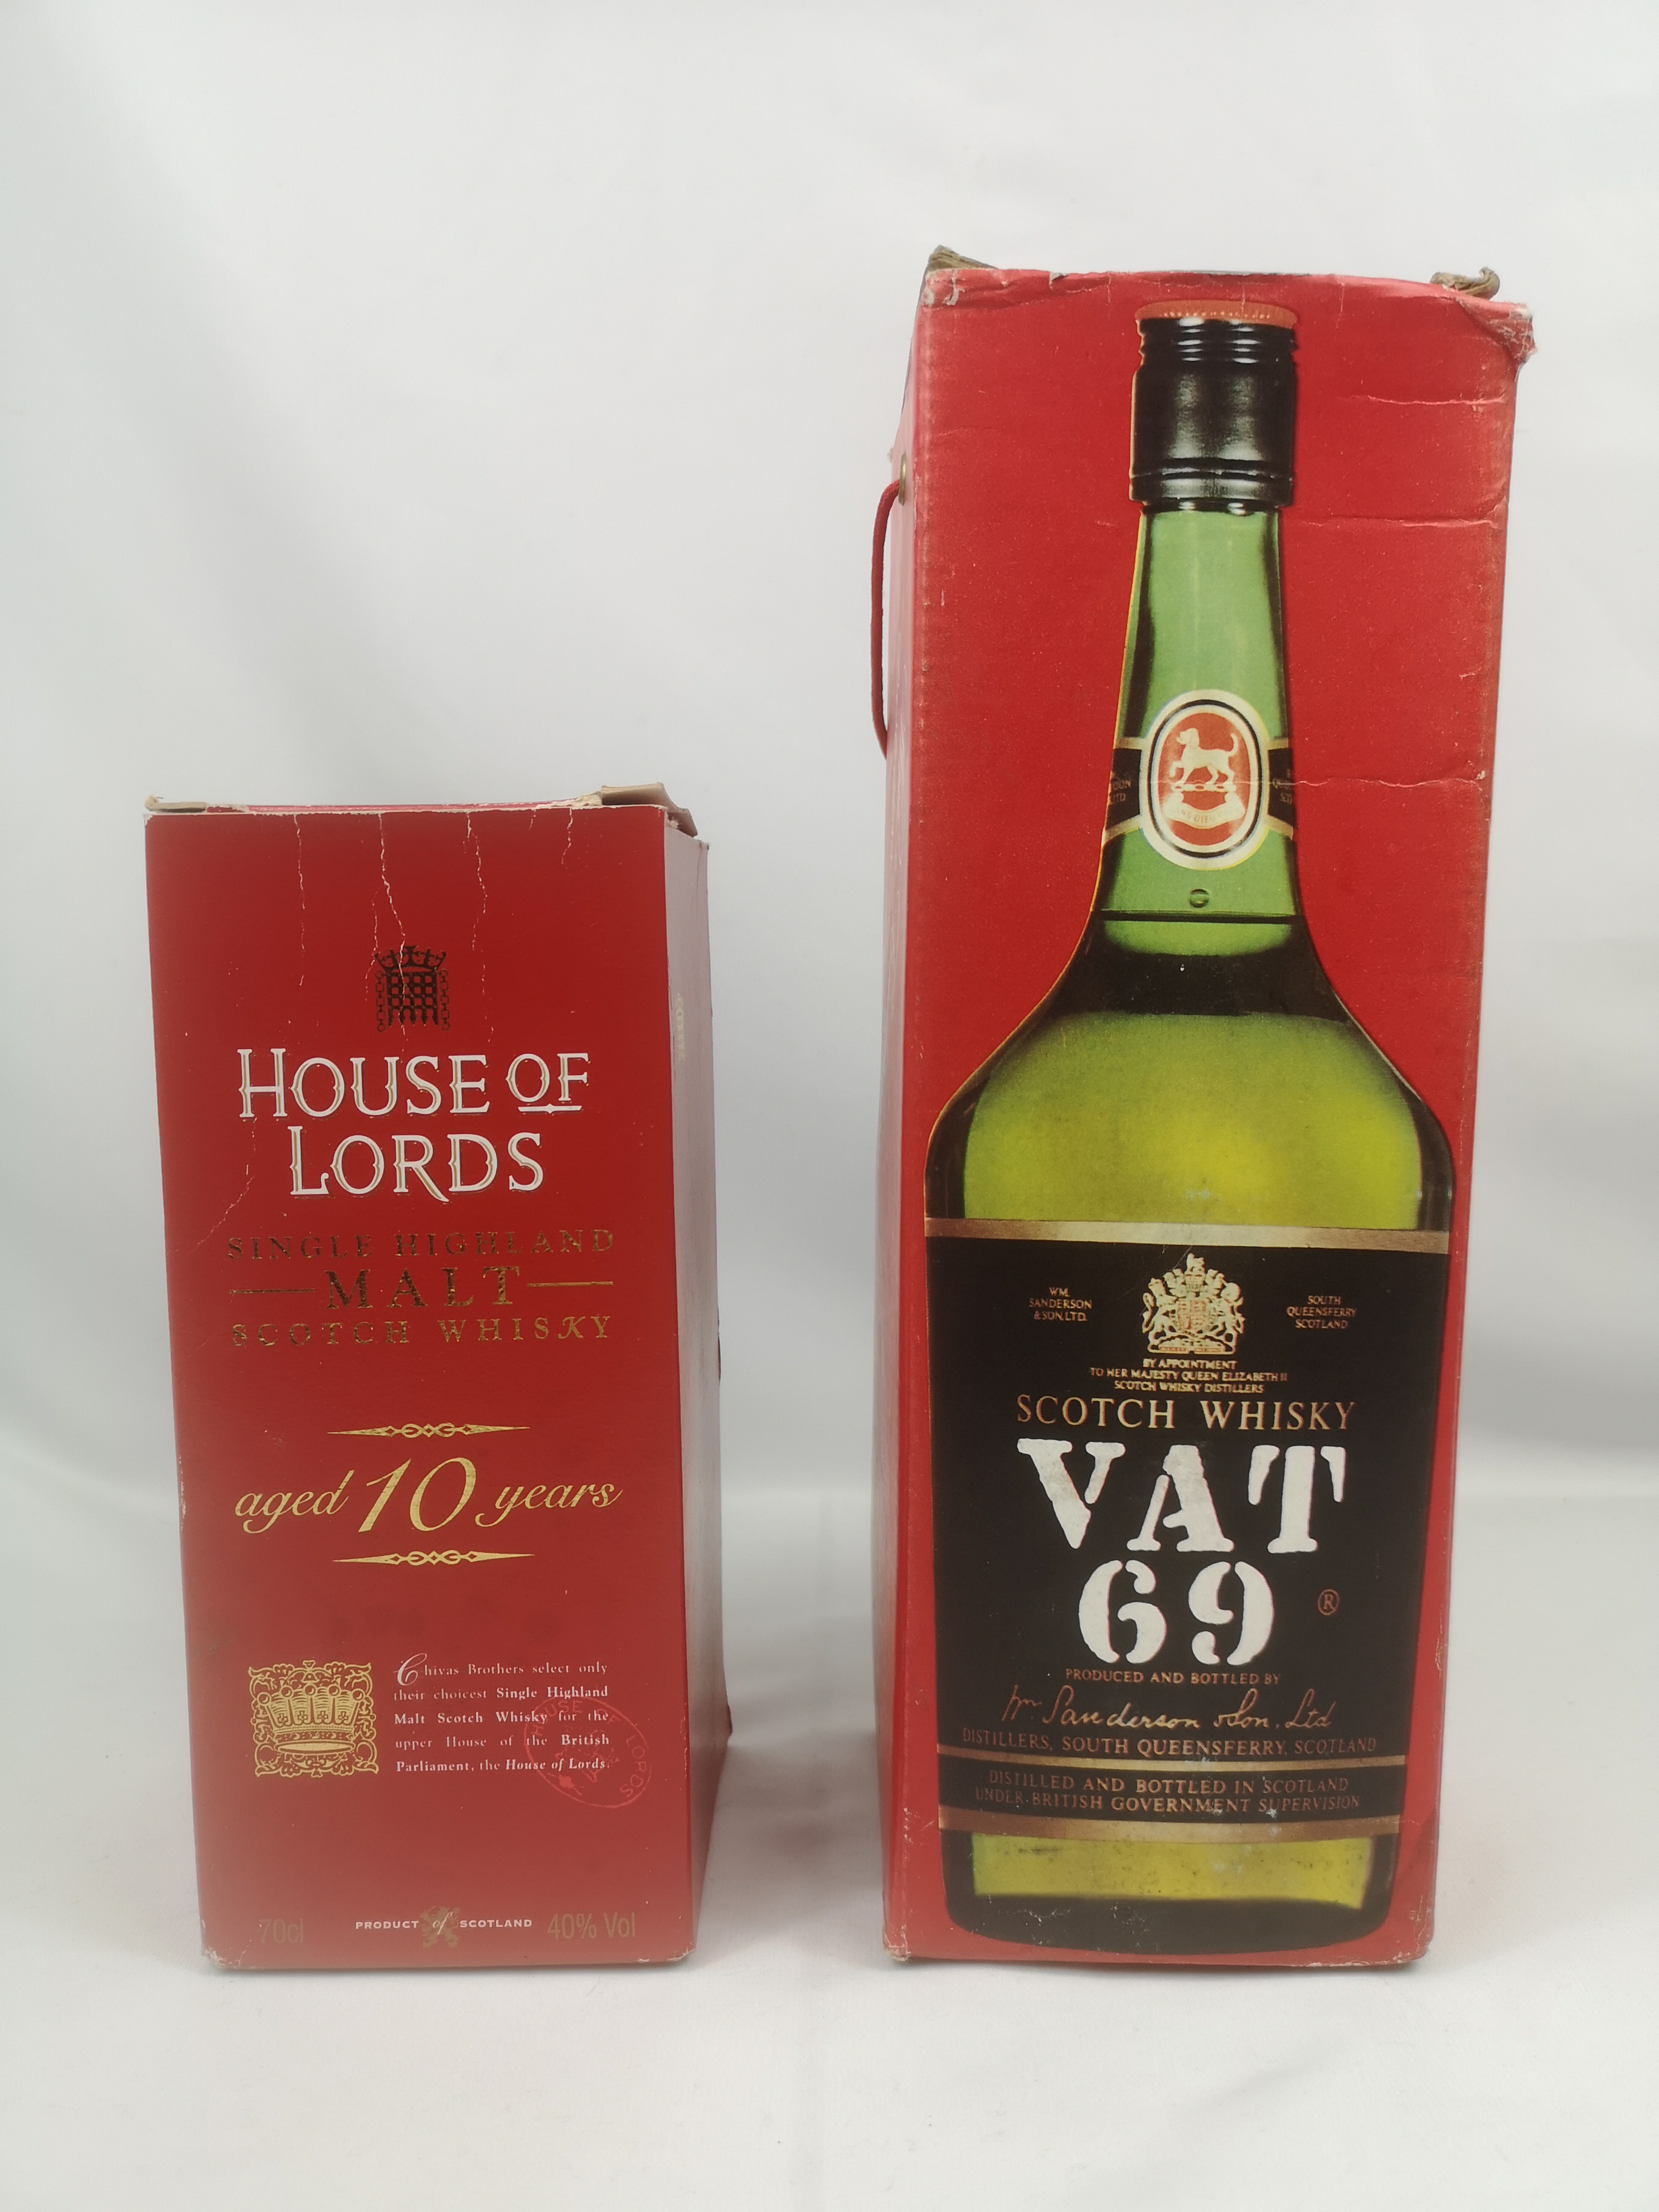 Two bottles of Scotch whisky